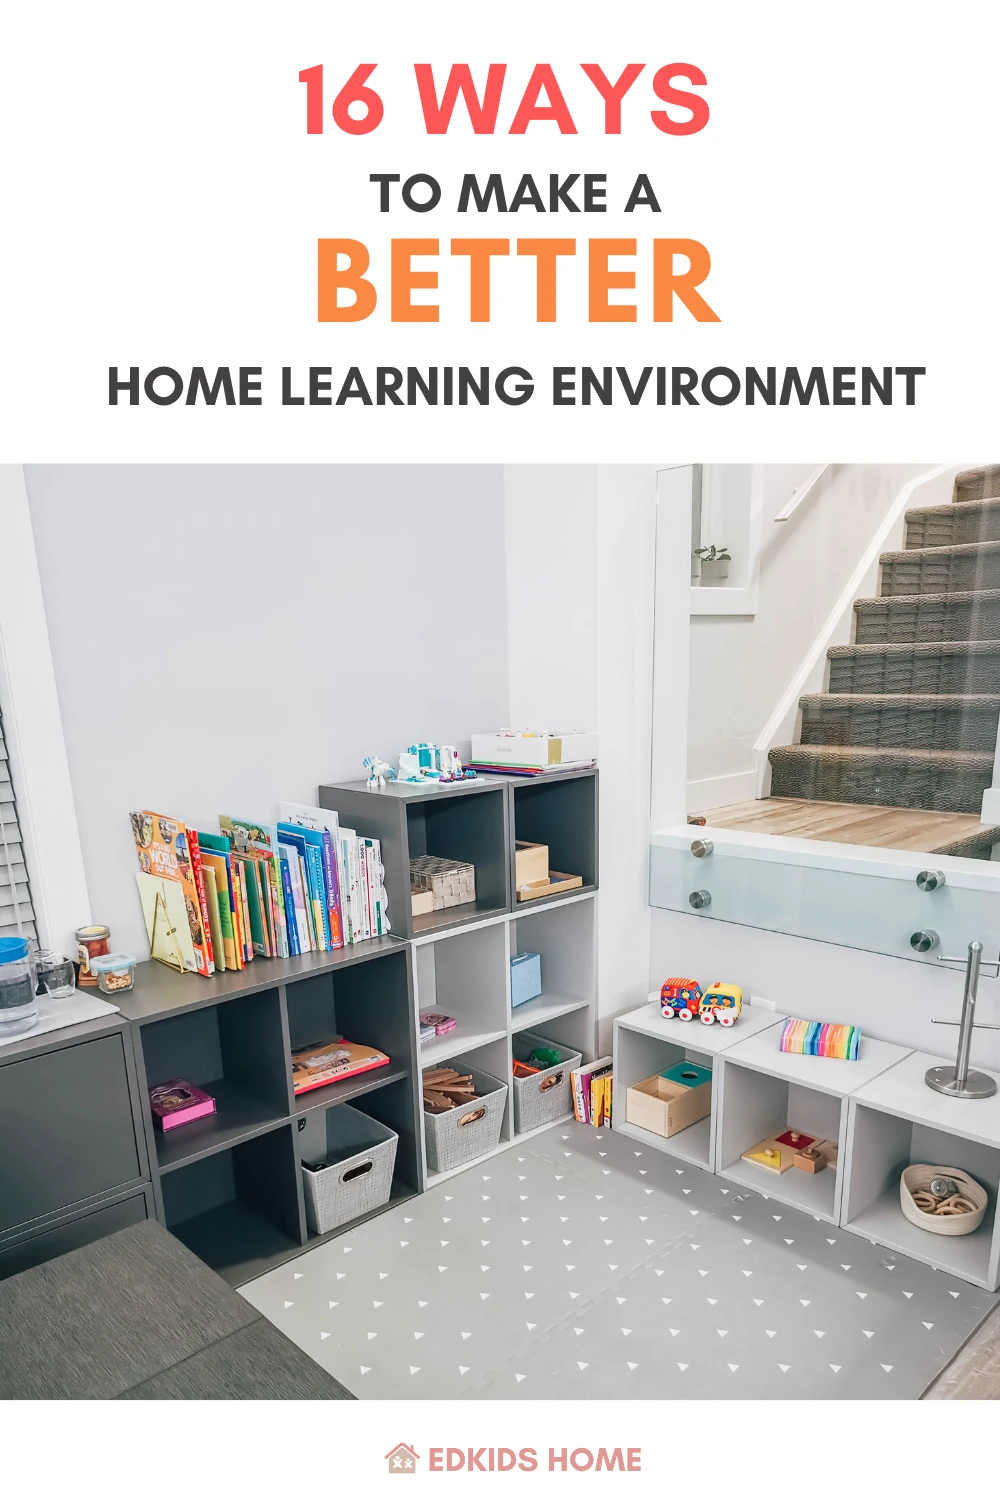 16 Ways to make a better home learning enironment